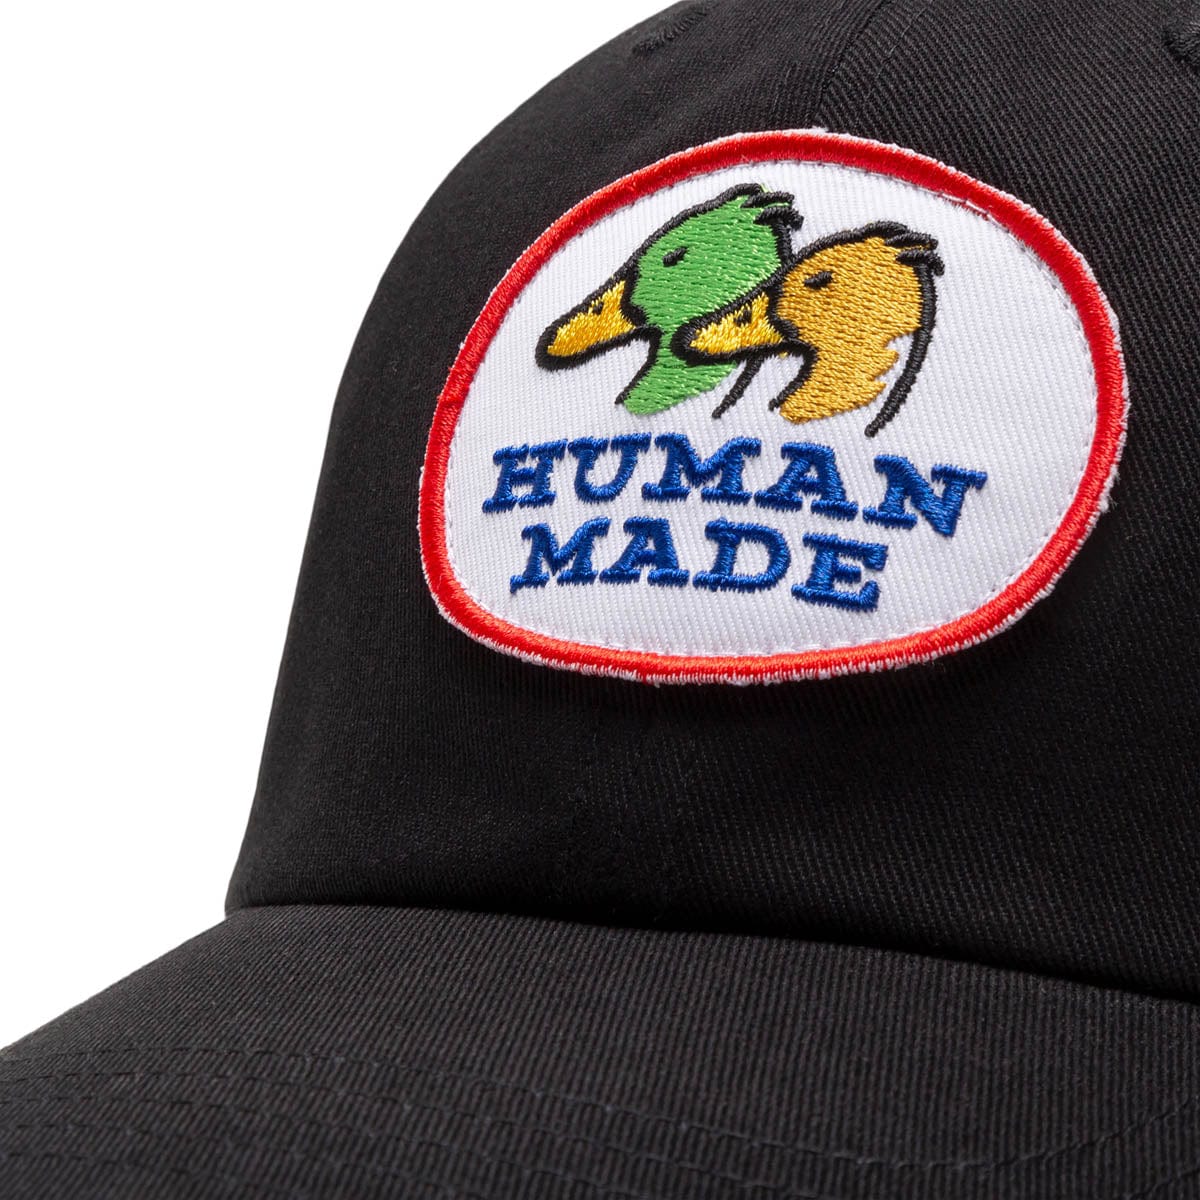 Human Made 6Panel Twill #4 Tiger Cap Black for Women